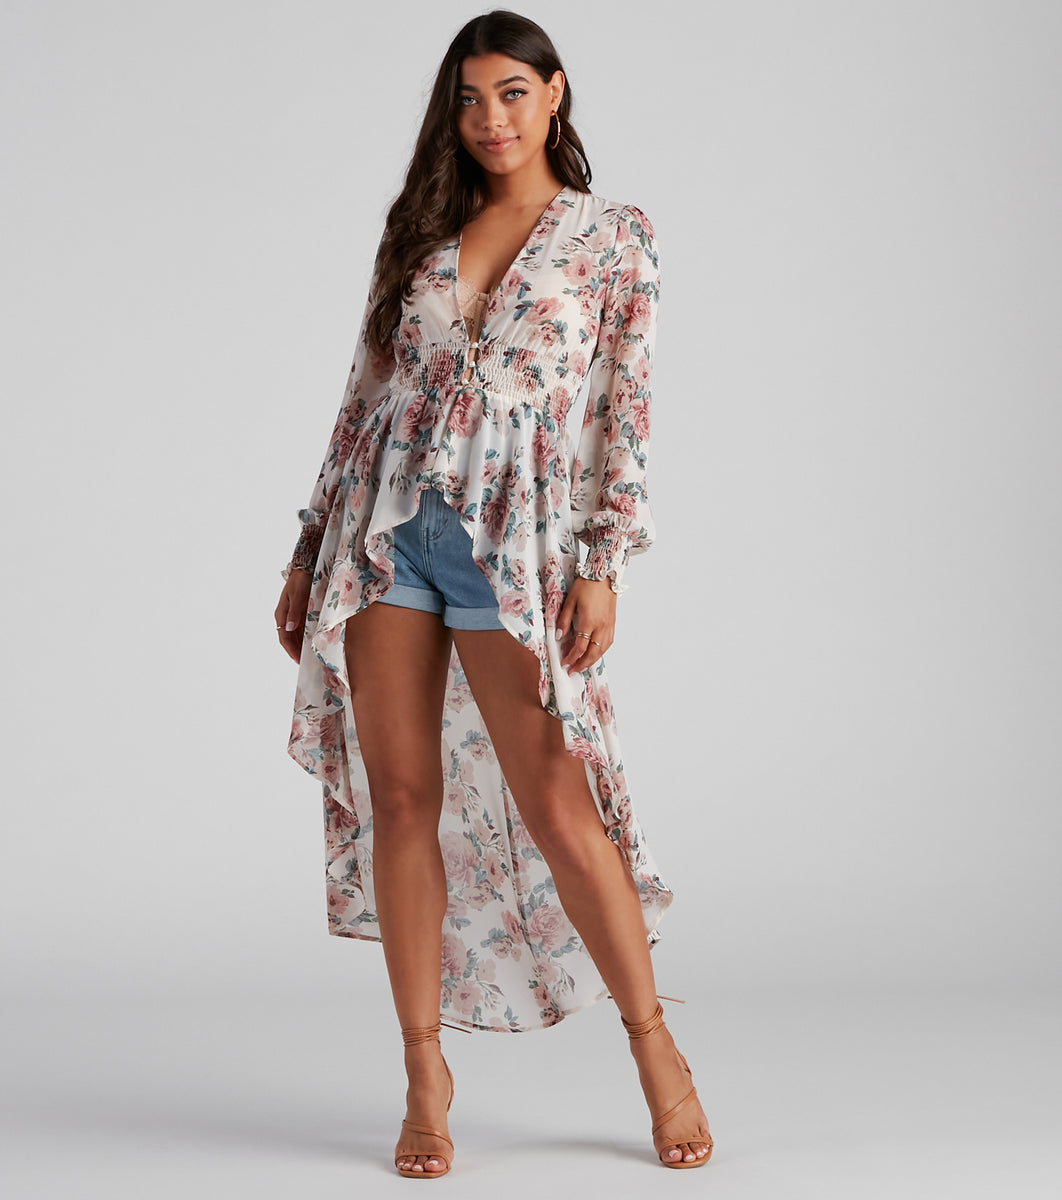 Sweet Nothings Floral Chiffon Top